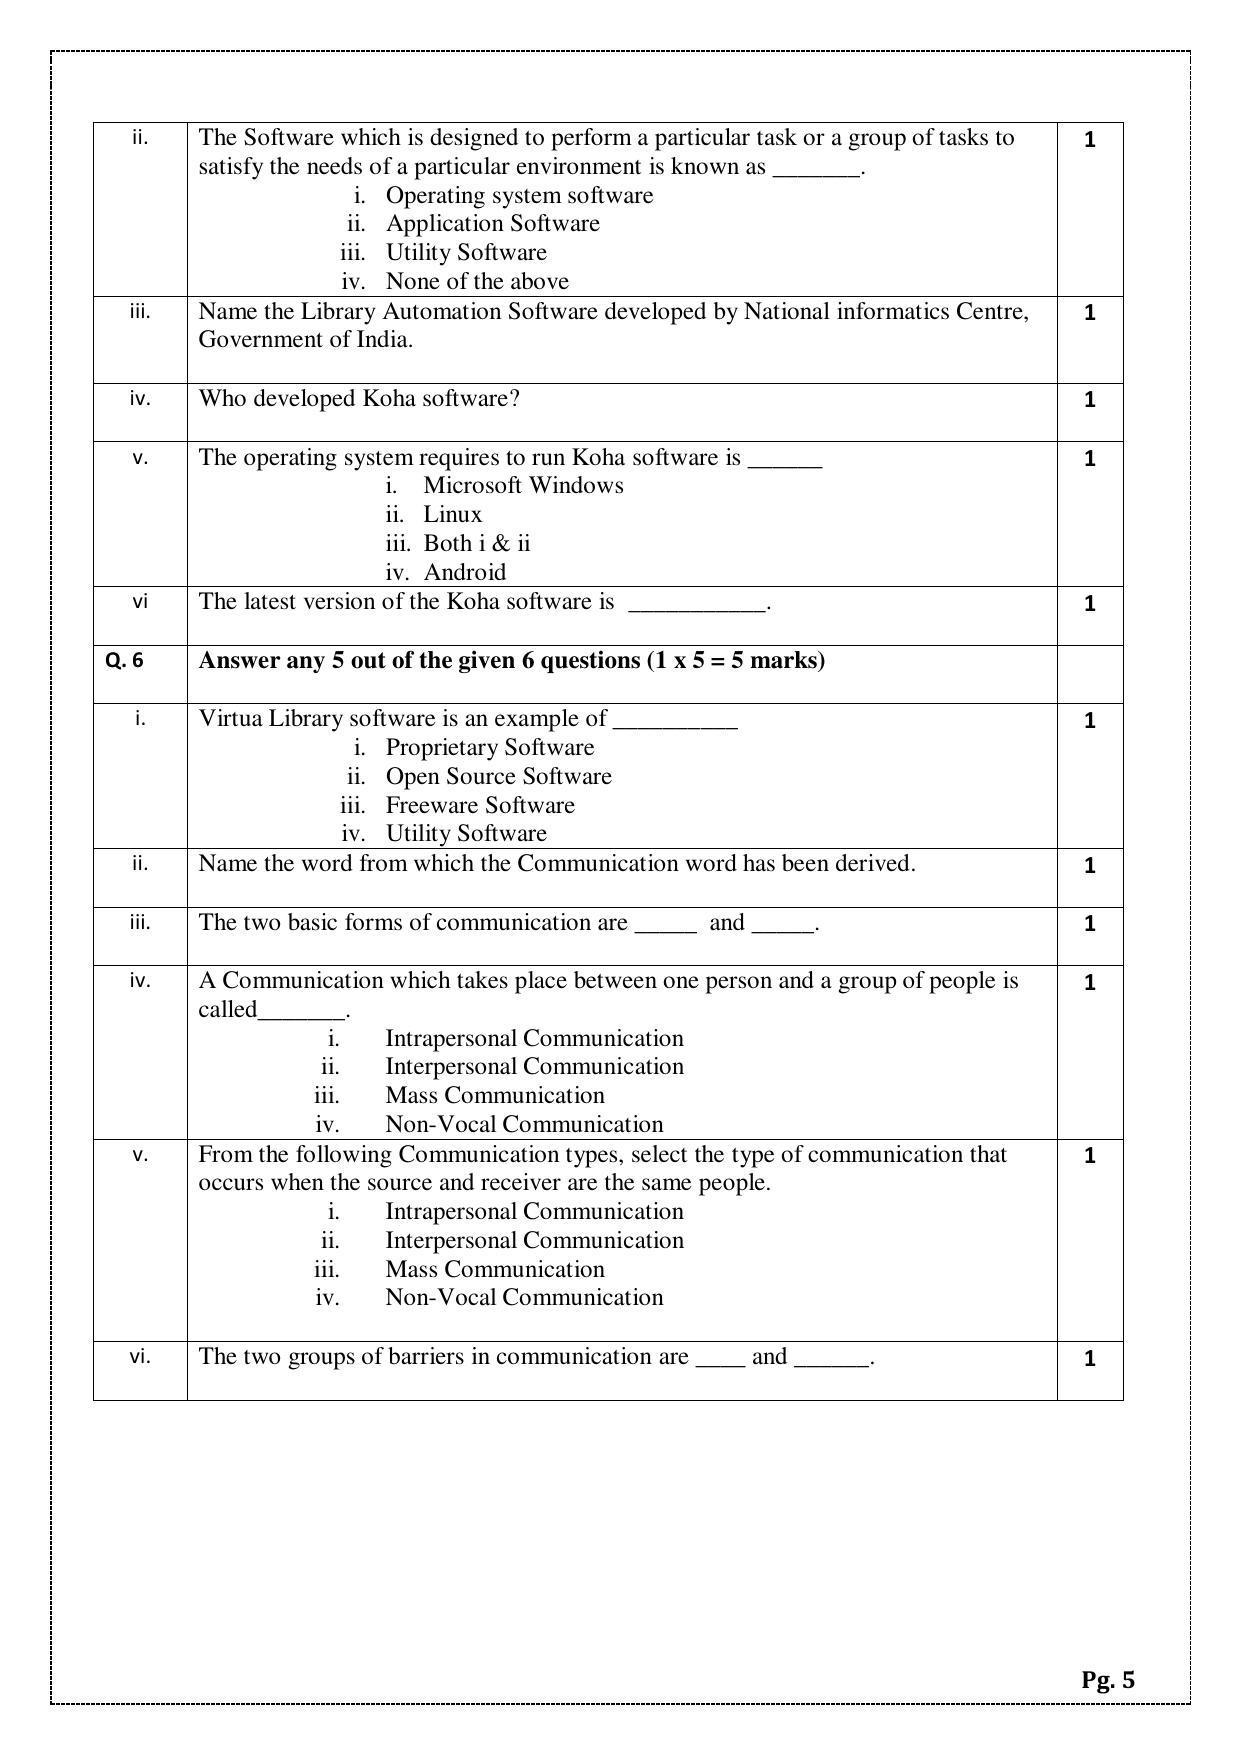 CBSE Class 12 Library & Information Science (Skill Education) Sample Papers 2023 - Page 5